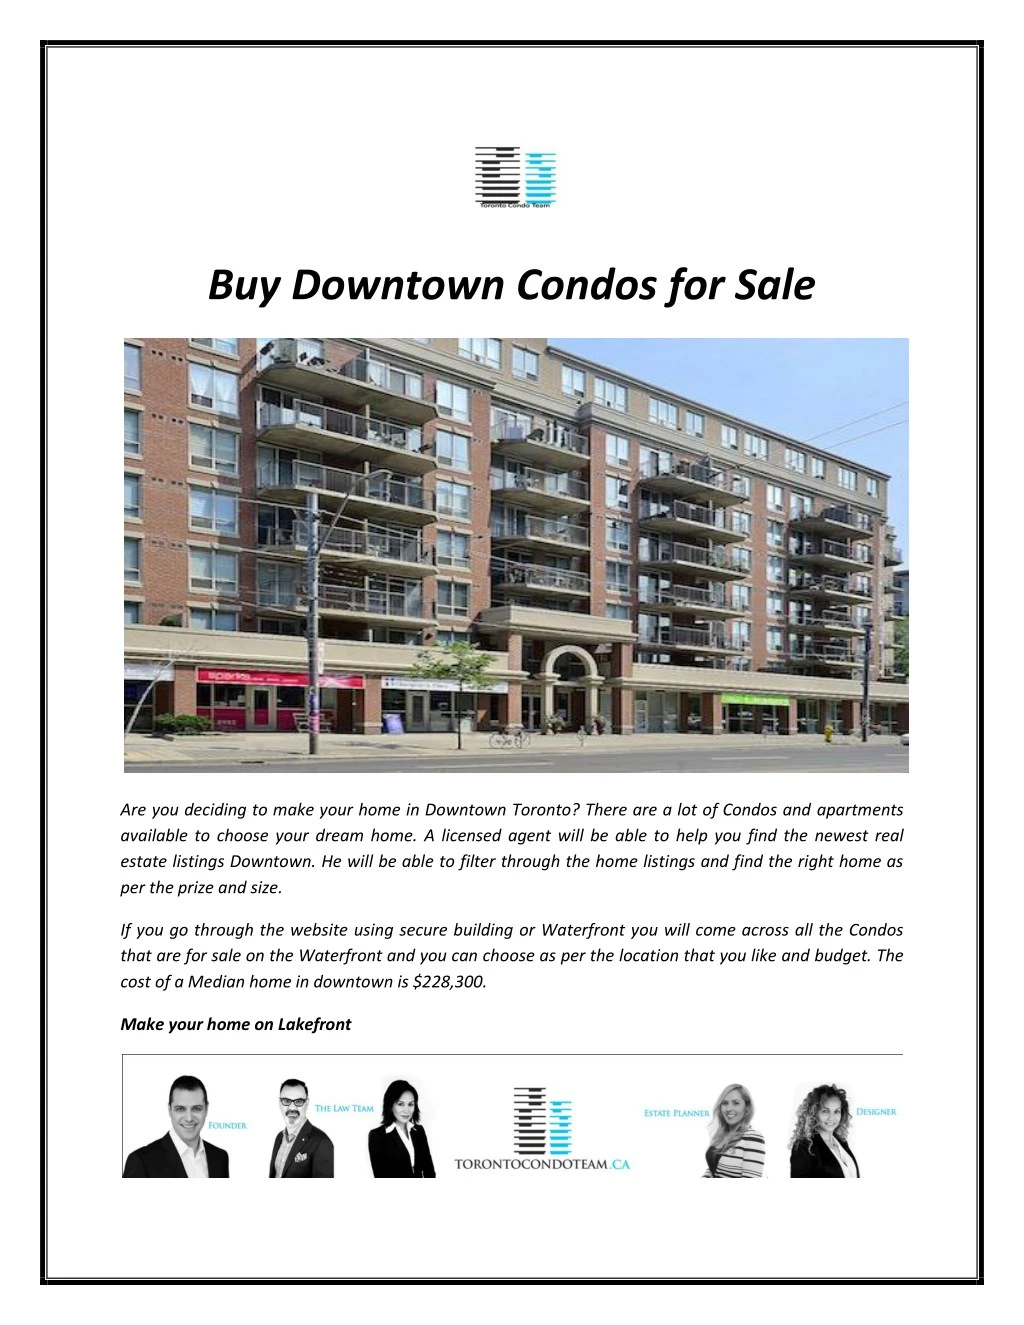 buy downtown condos for sale